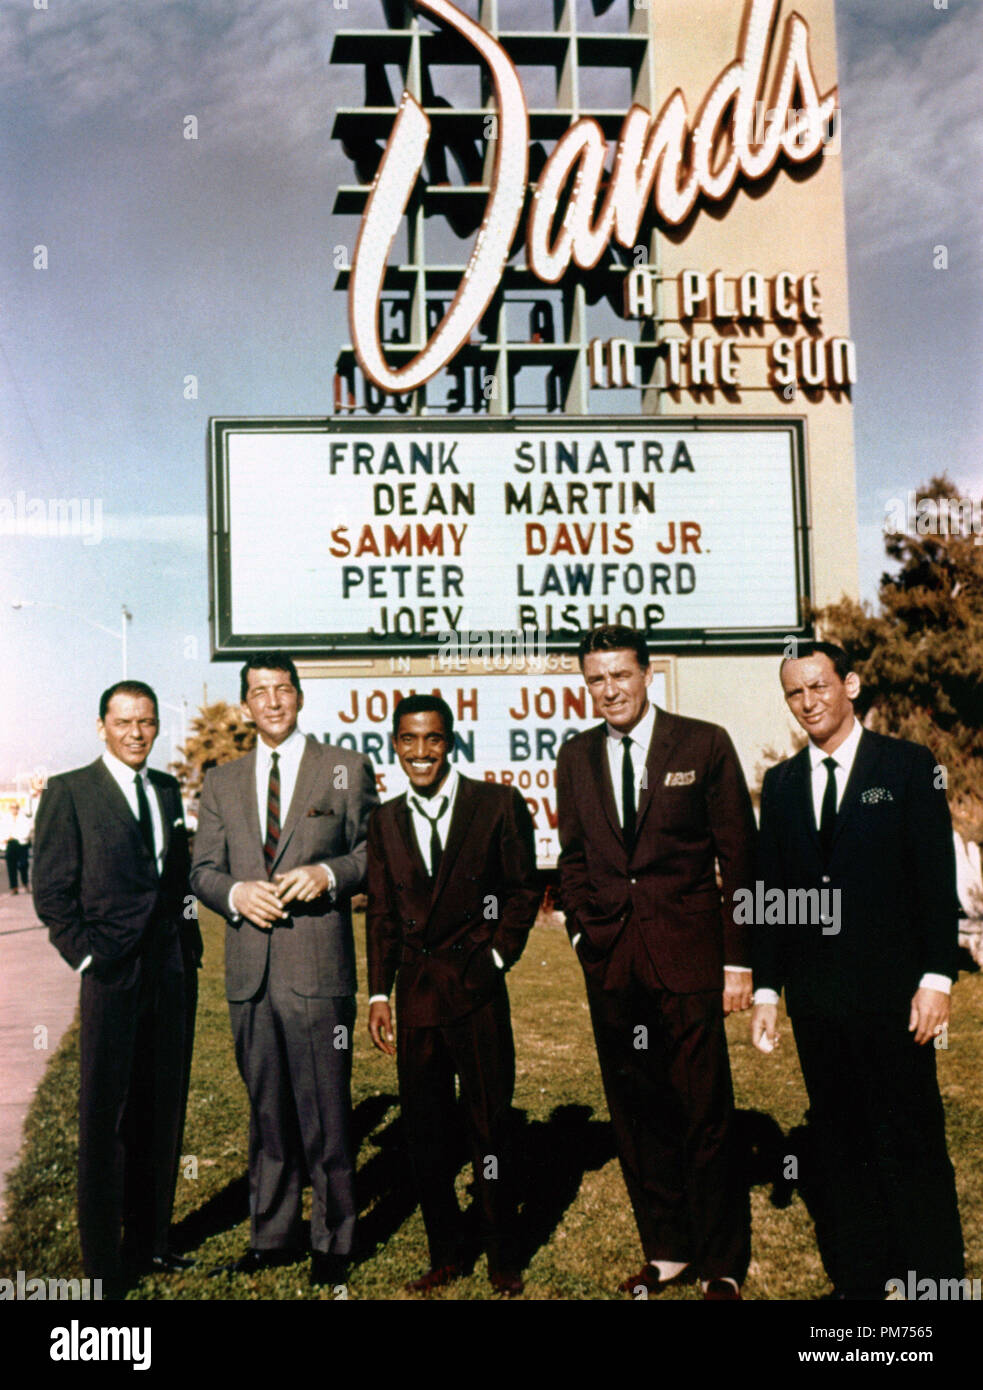 Members of the Rat Pack, Frank Sinatra, Dean Martin, Sammy Davis Jr., Peter Lawford and Joey Bishop at the Sands Hotel, circa 1960.  File Reference # 30928 366THA Stock Photo